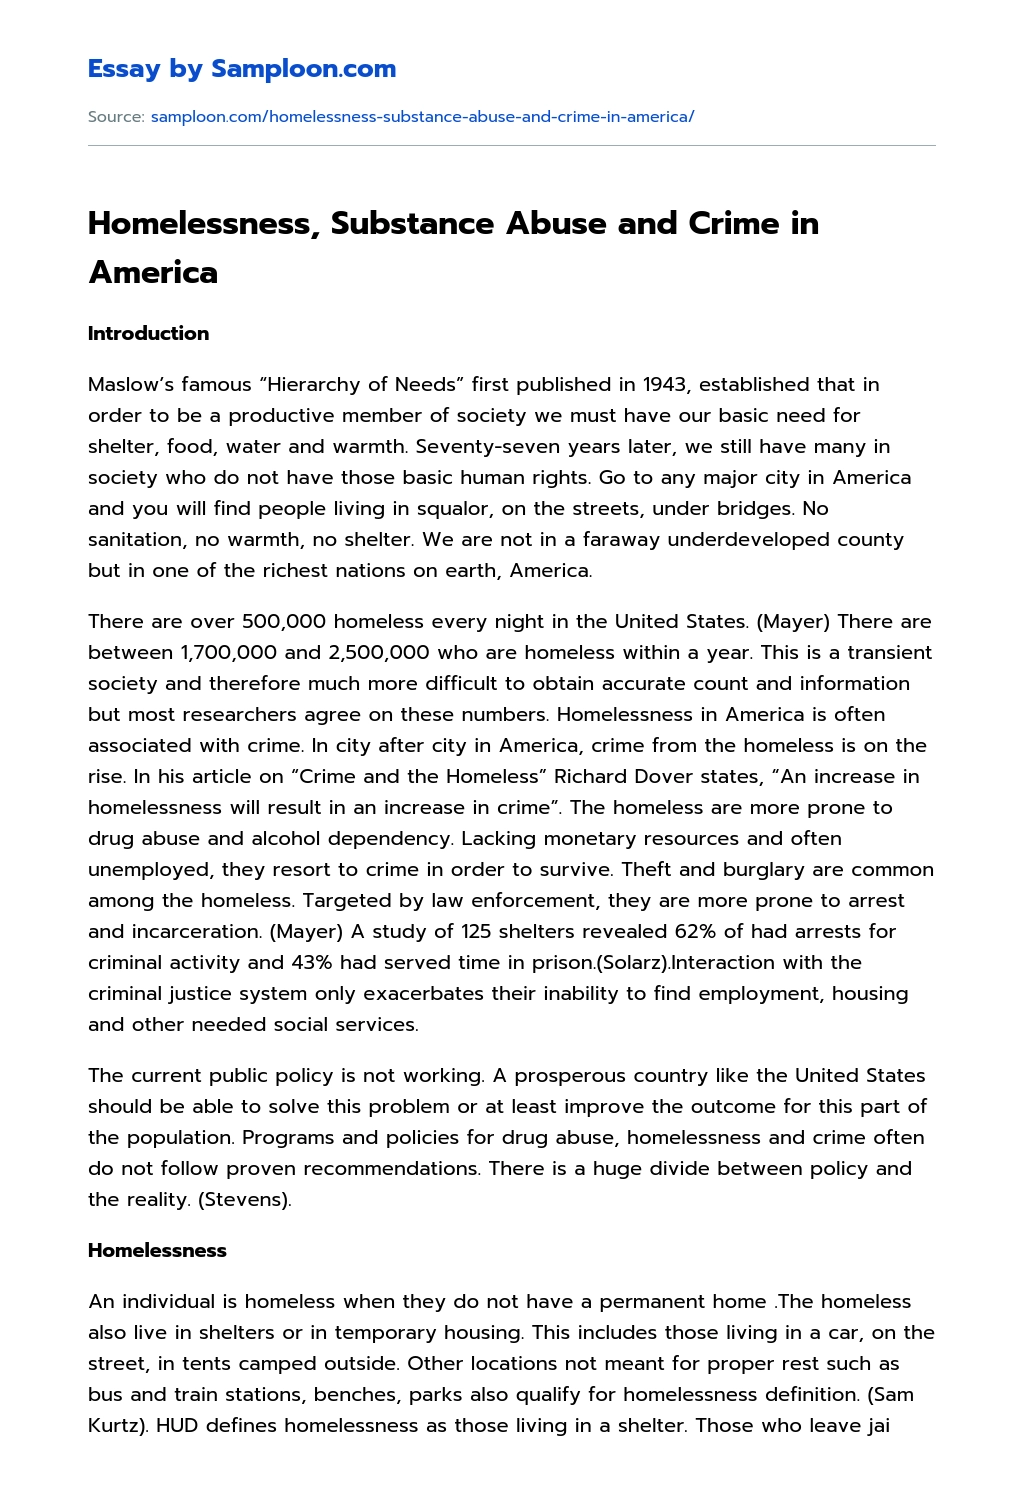 Homelessness, Substance Abuse and Crime in America essay